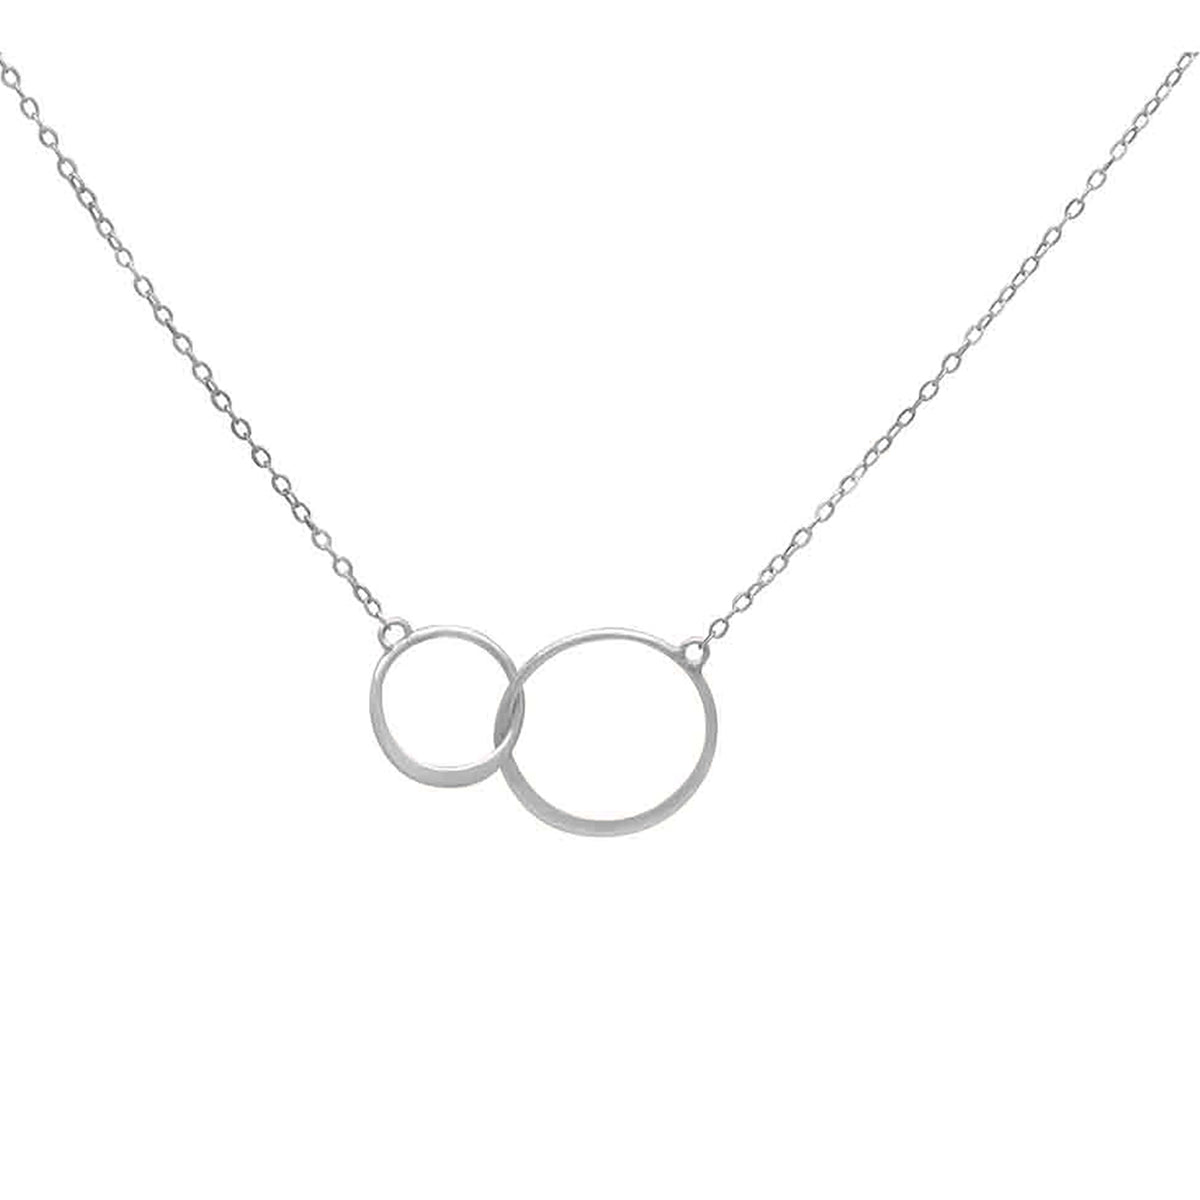 Interlocking Double Link Necklace - Love It Personalized